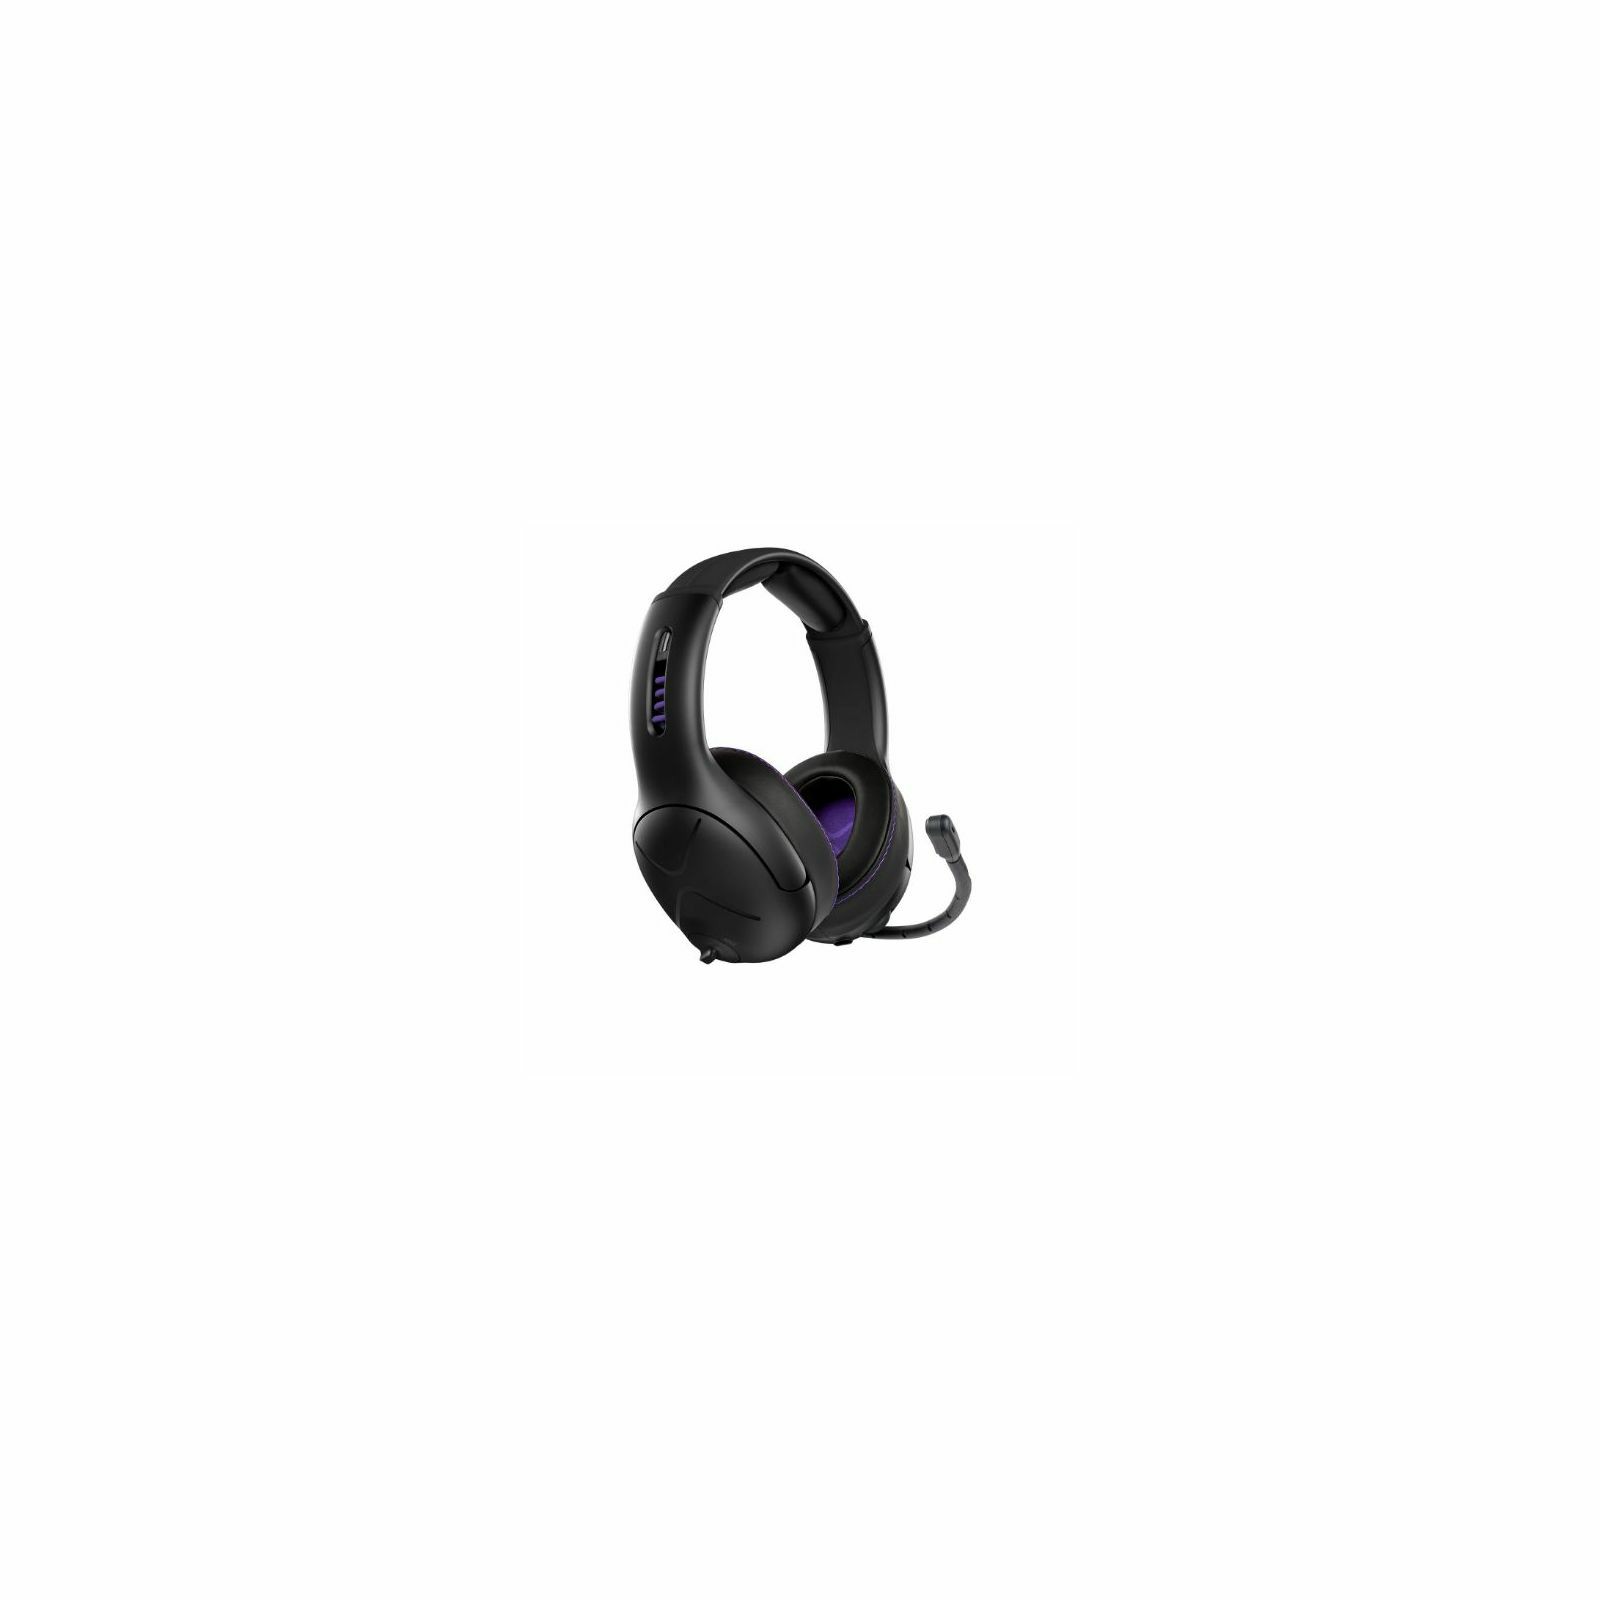 pdp-victrix-gambit-headset-for-xbox-series-x-708056067533_45188.jpg